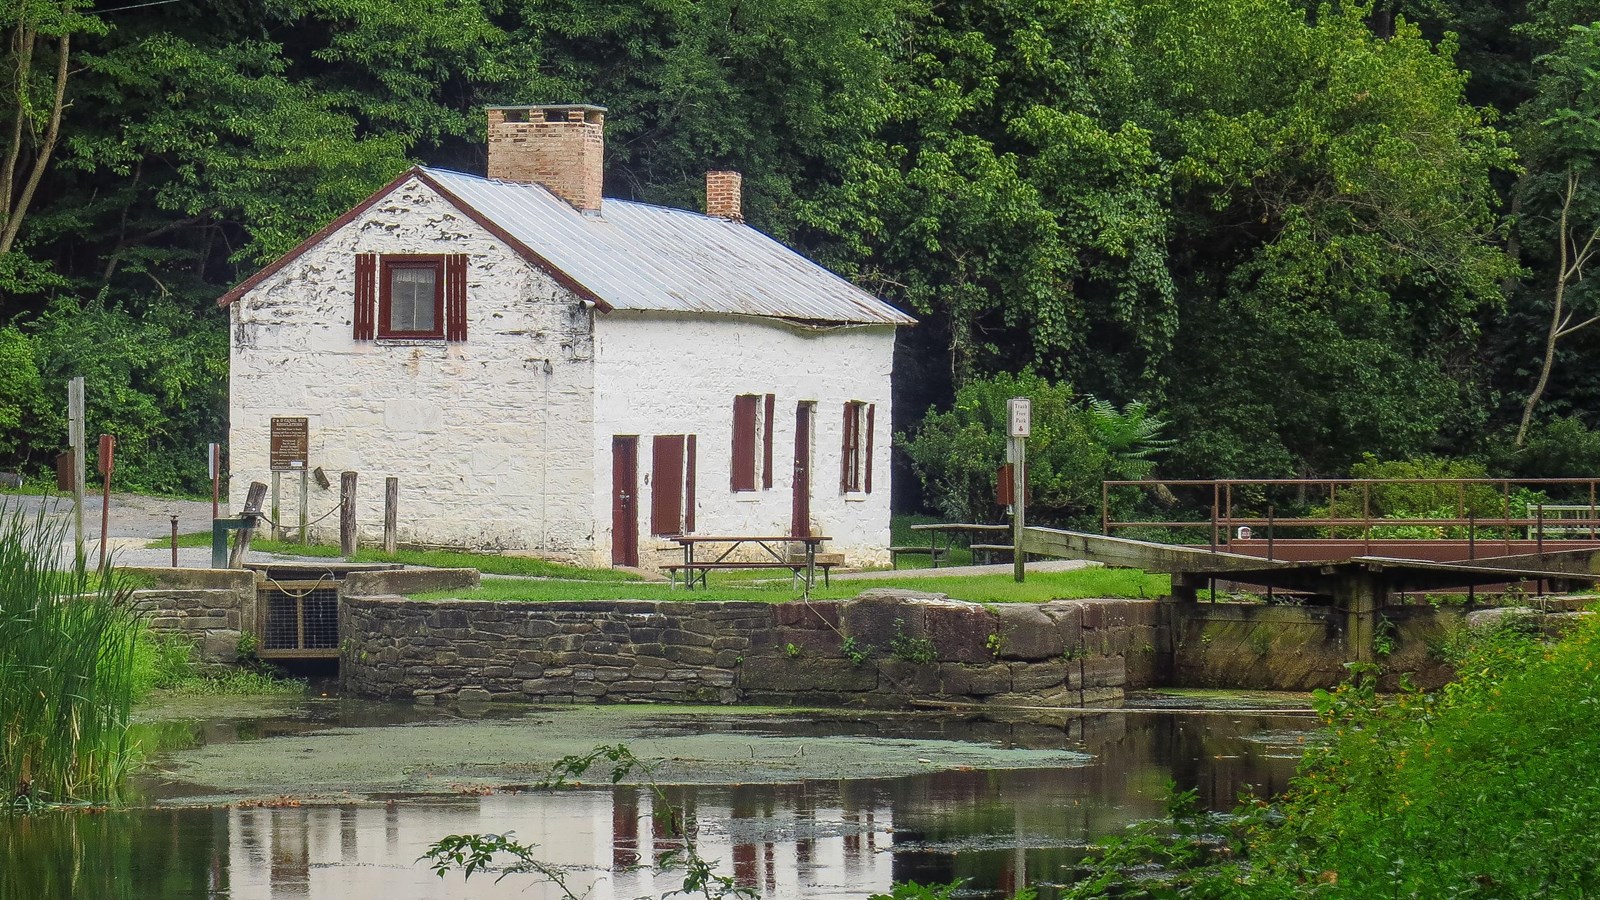 A white lockhouse sits on the far side of a watered canal.